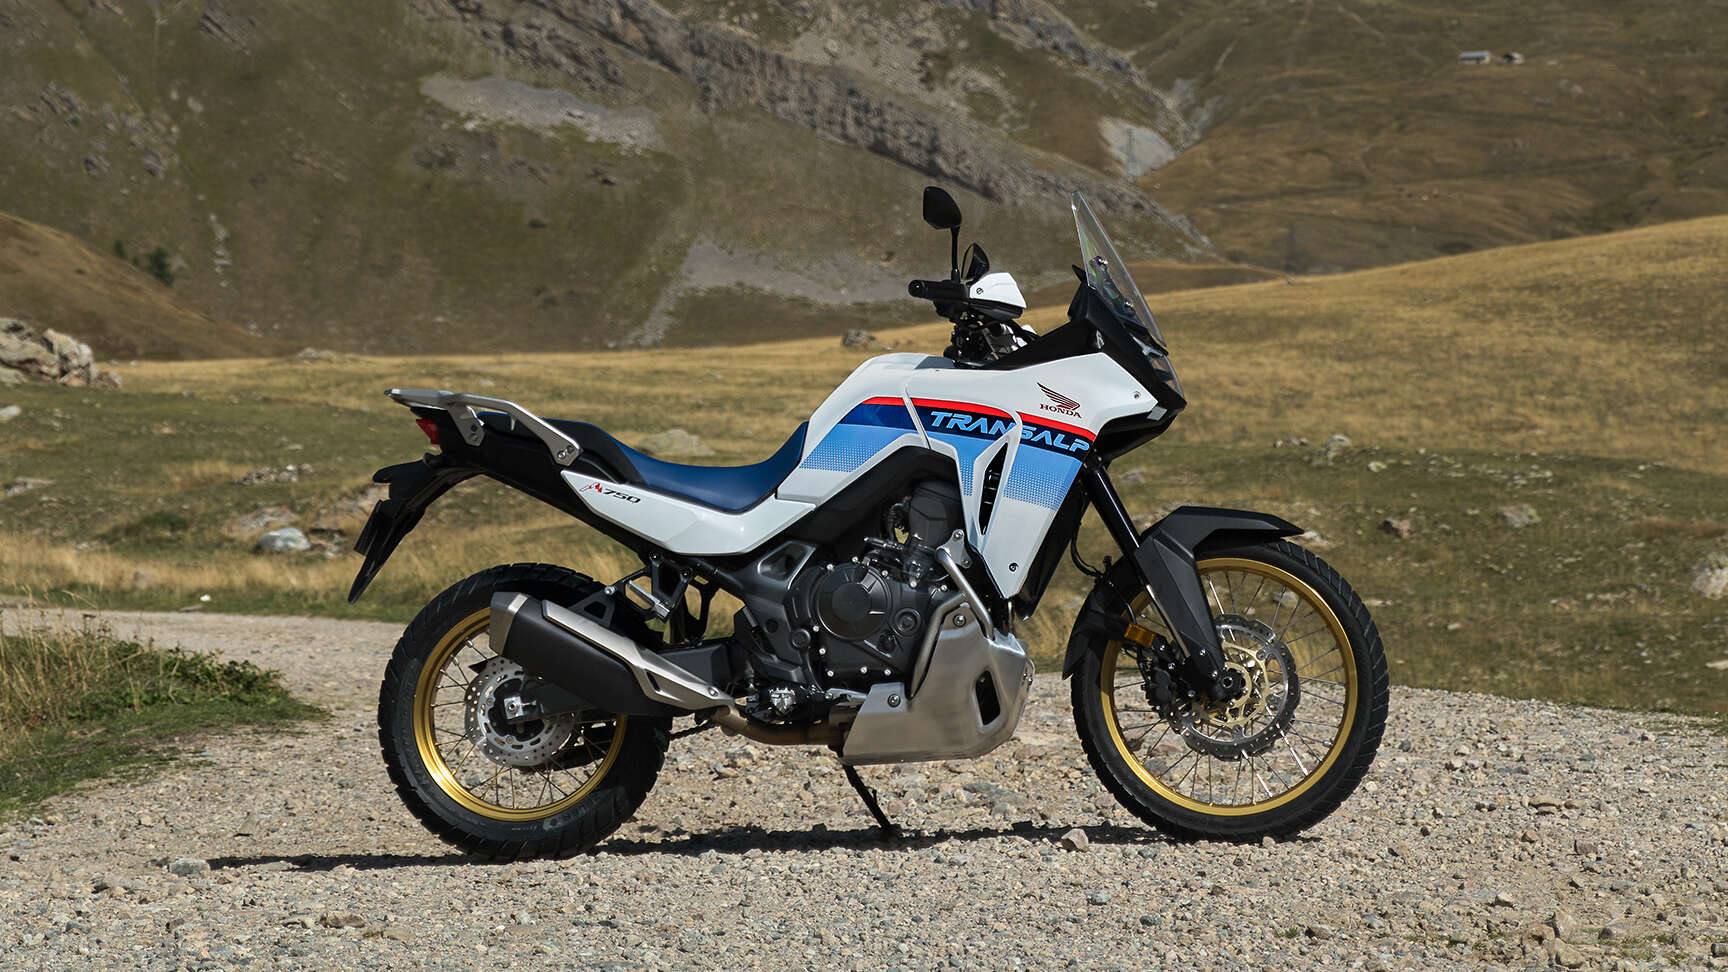 XL750 Transalp fitted with Rally Pack.